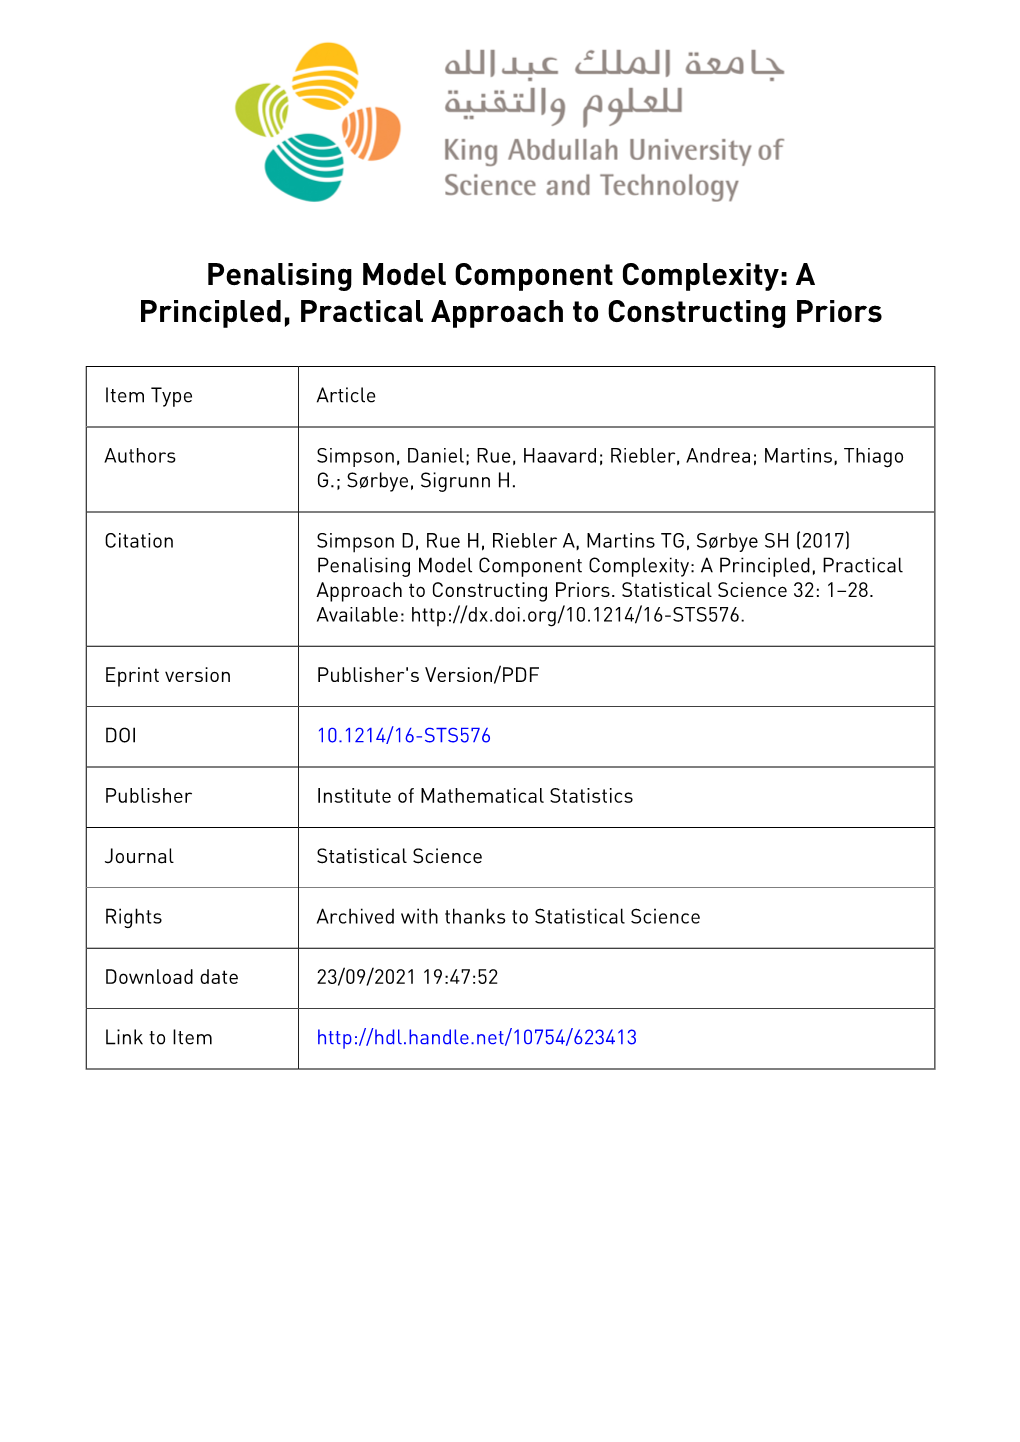 Penalising Model Component Complexity: a Principled, Practical Approach to Constructing Priors